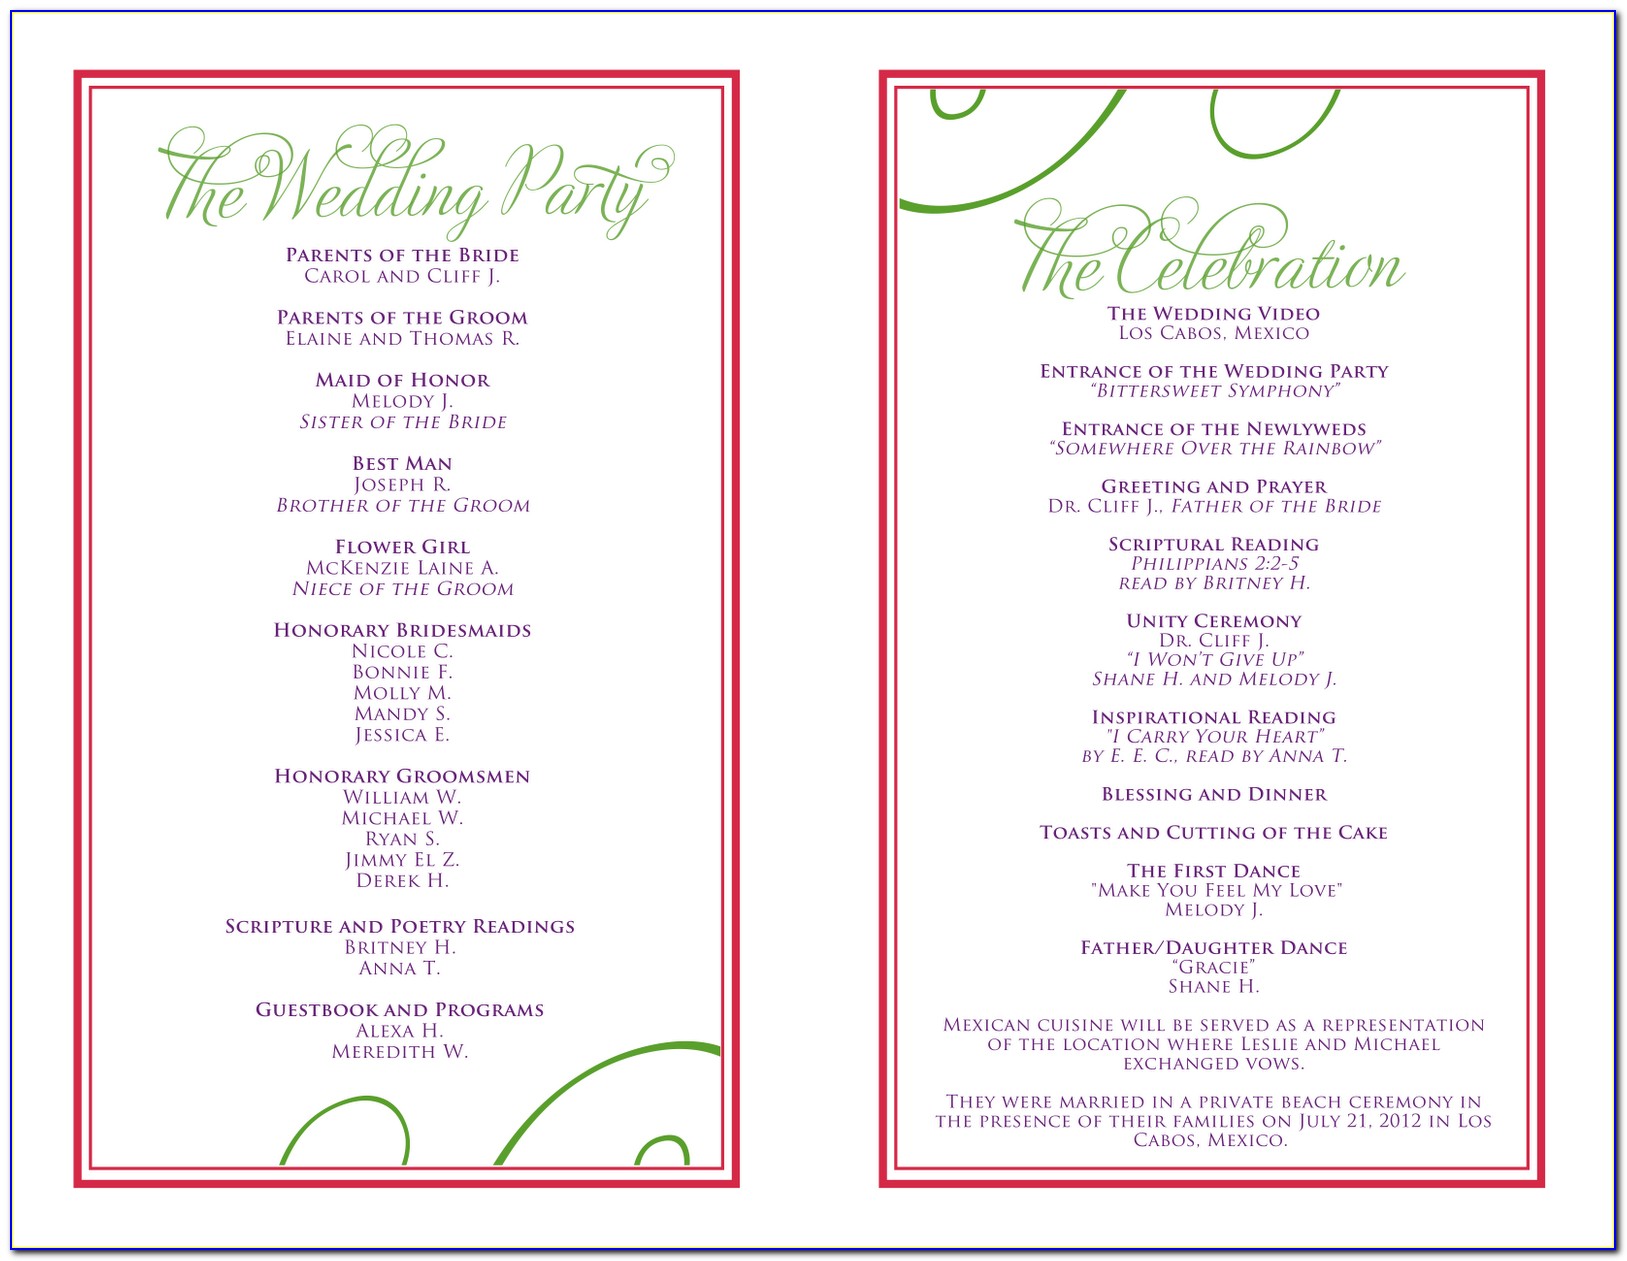 Free Downloadable Wedding Reception Program Template That Can Be Printed